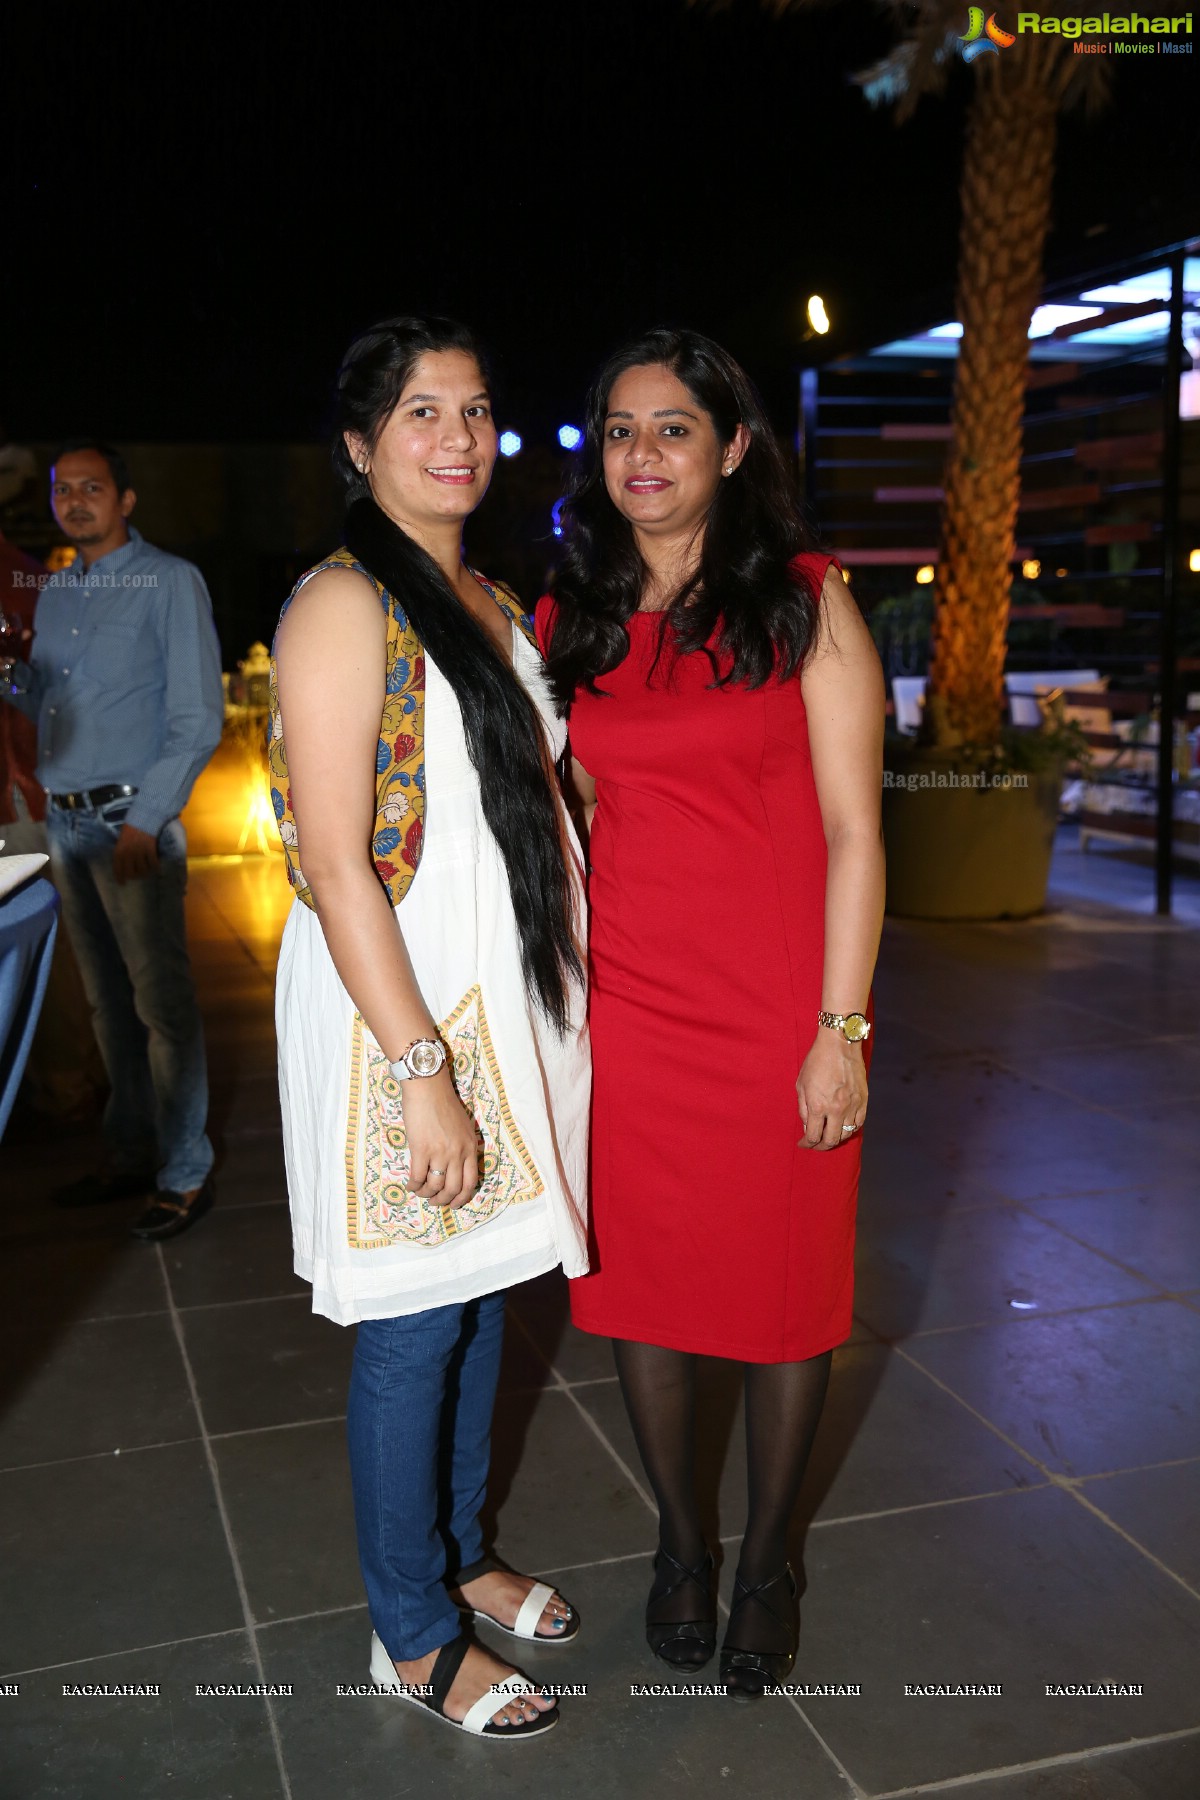 Wine Tasting Event by Round Table India 303 at Marigold by Green Park